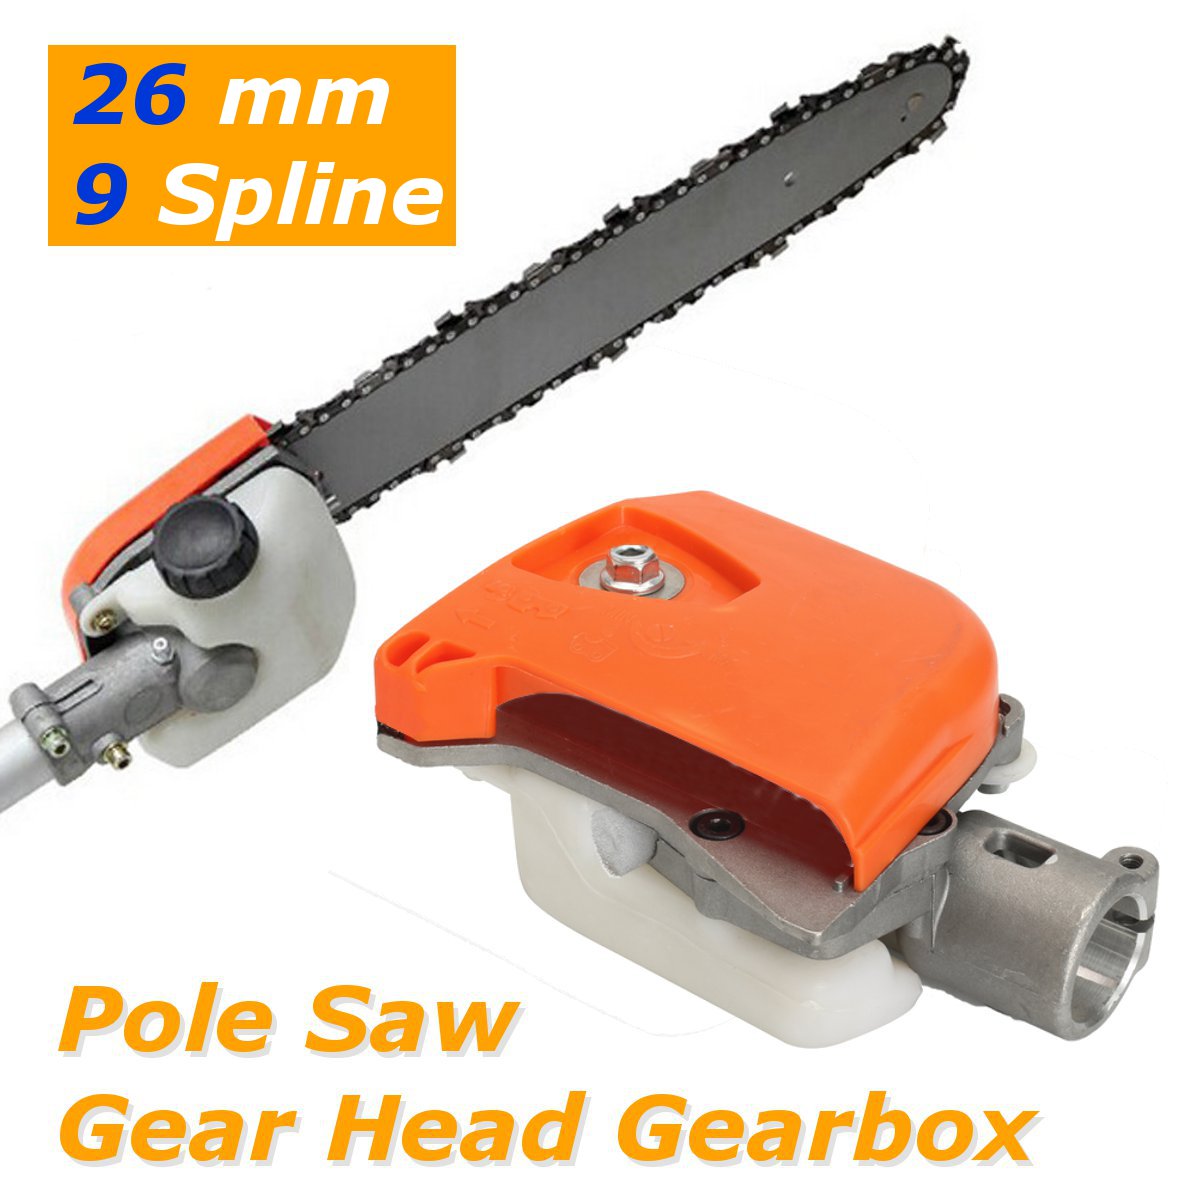 26mm-9-Gears-Pole-Saw-Chainsaw-Gear-Head-Gearbox-for-Stihl-Trimmer-1233430